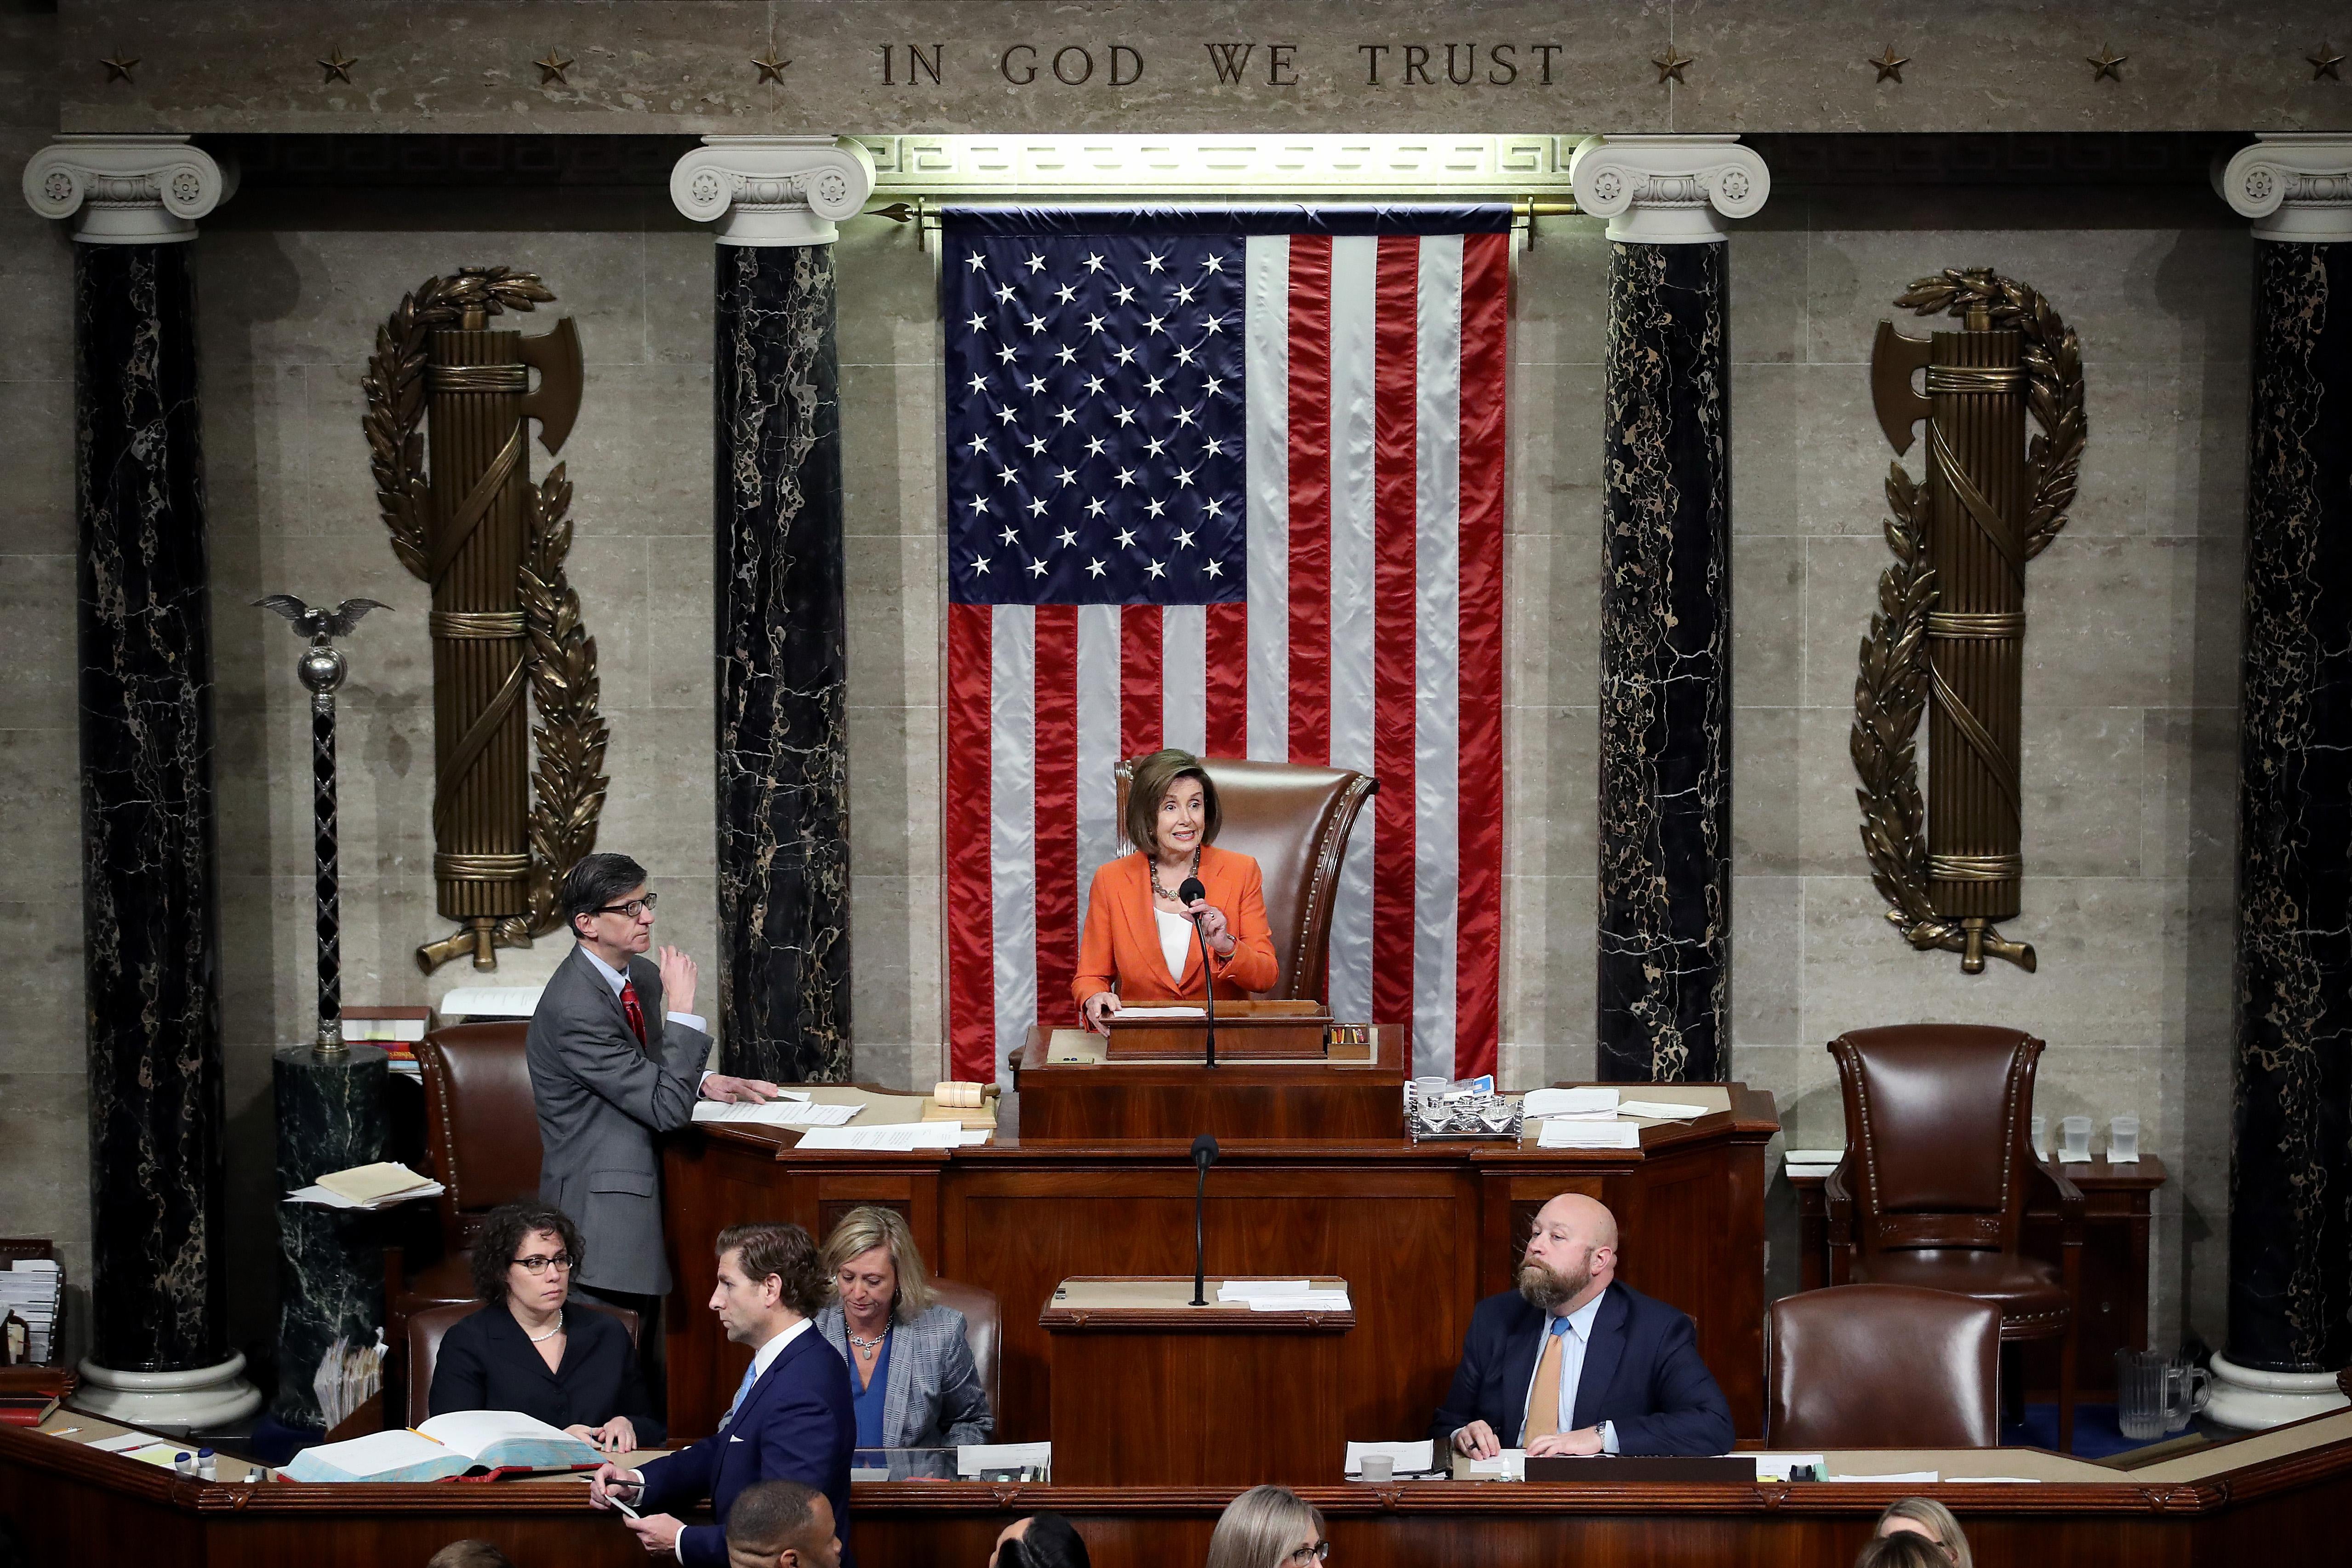 Speaker of the House Nancy Pelosi presides over a vote by the U.S. House of Representatives on a resolution formalizing the impeachment inquiry into President Donald Trump on October 31, 2019 in Washington, DC. 